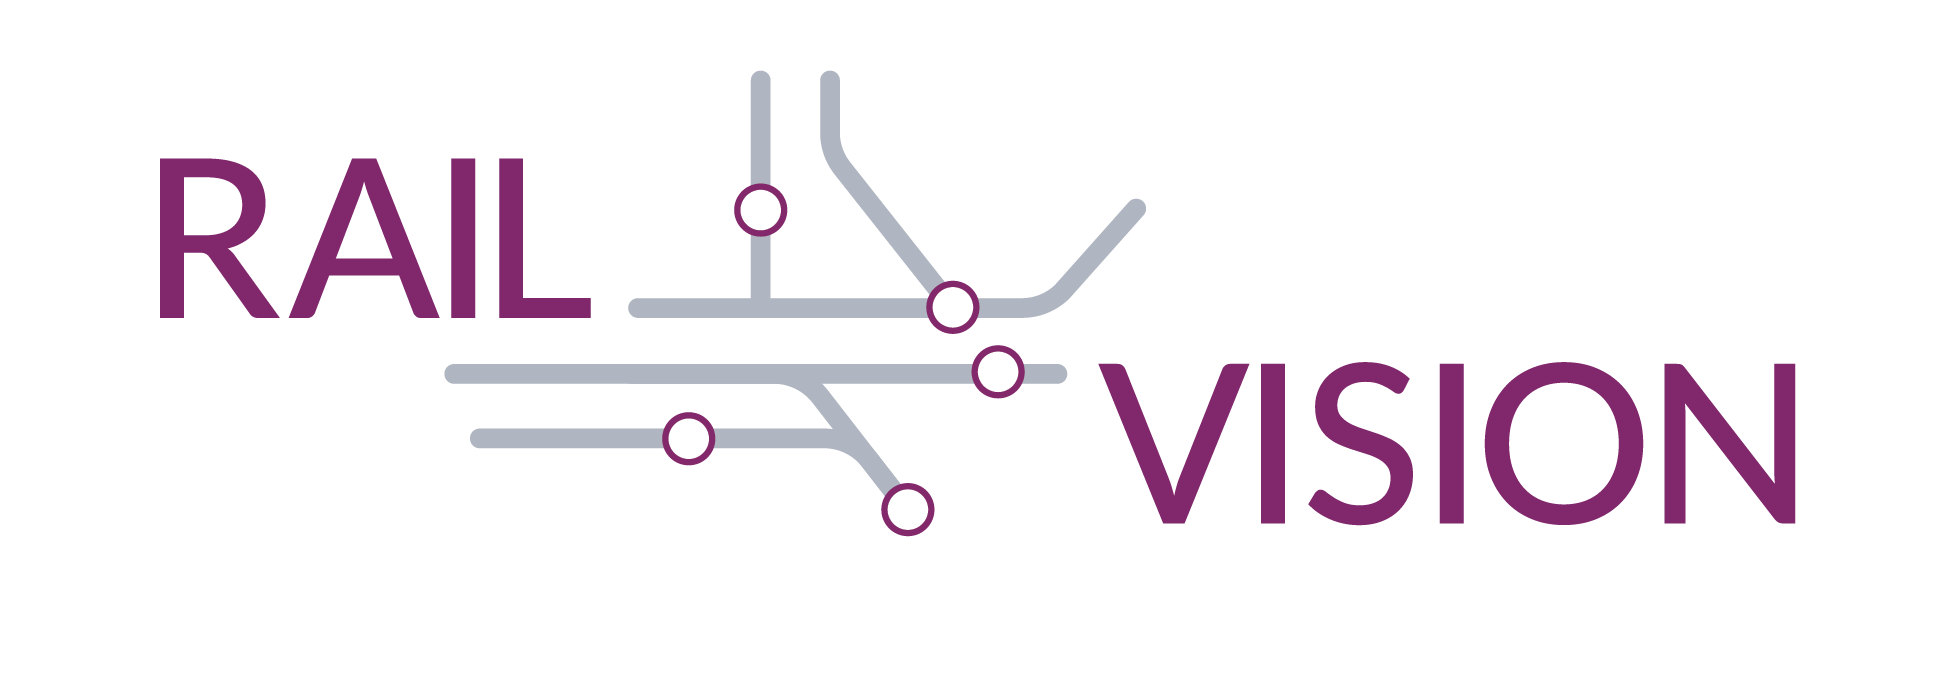 MBTA's Rail Vision Update: Open House on Tuesday, March 5